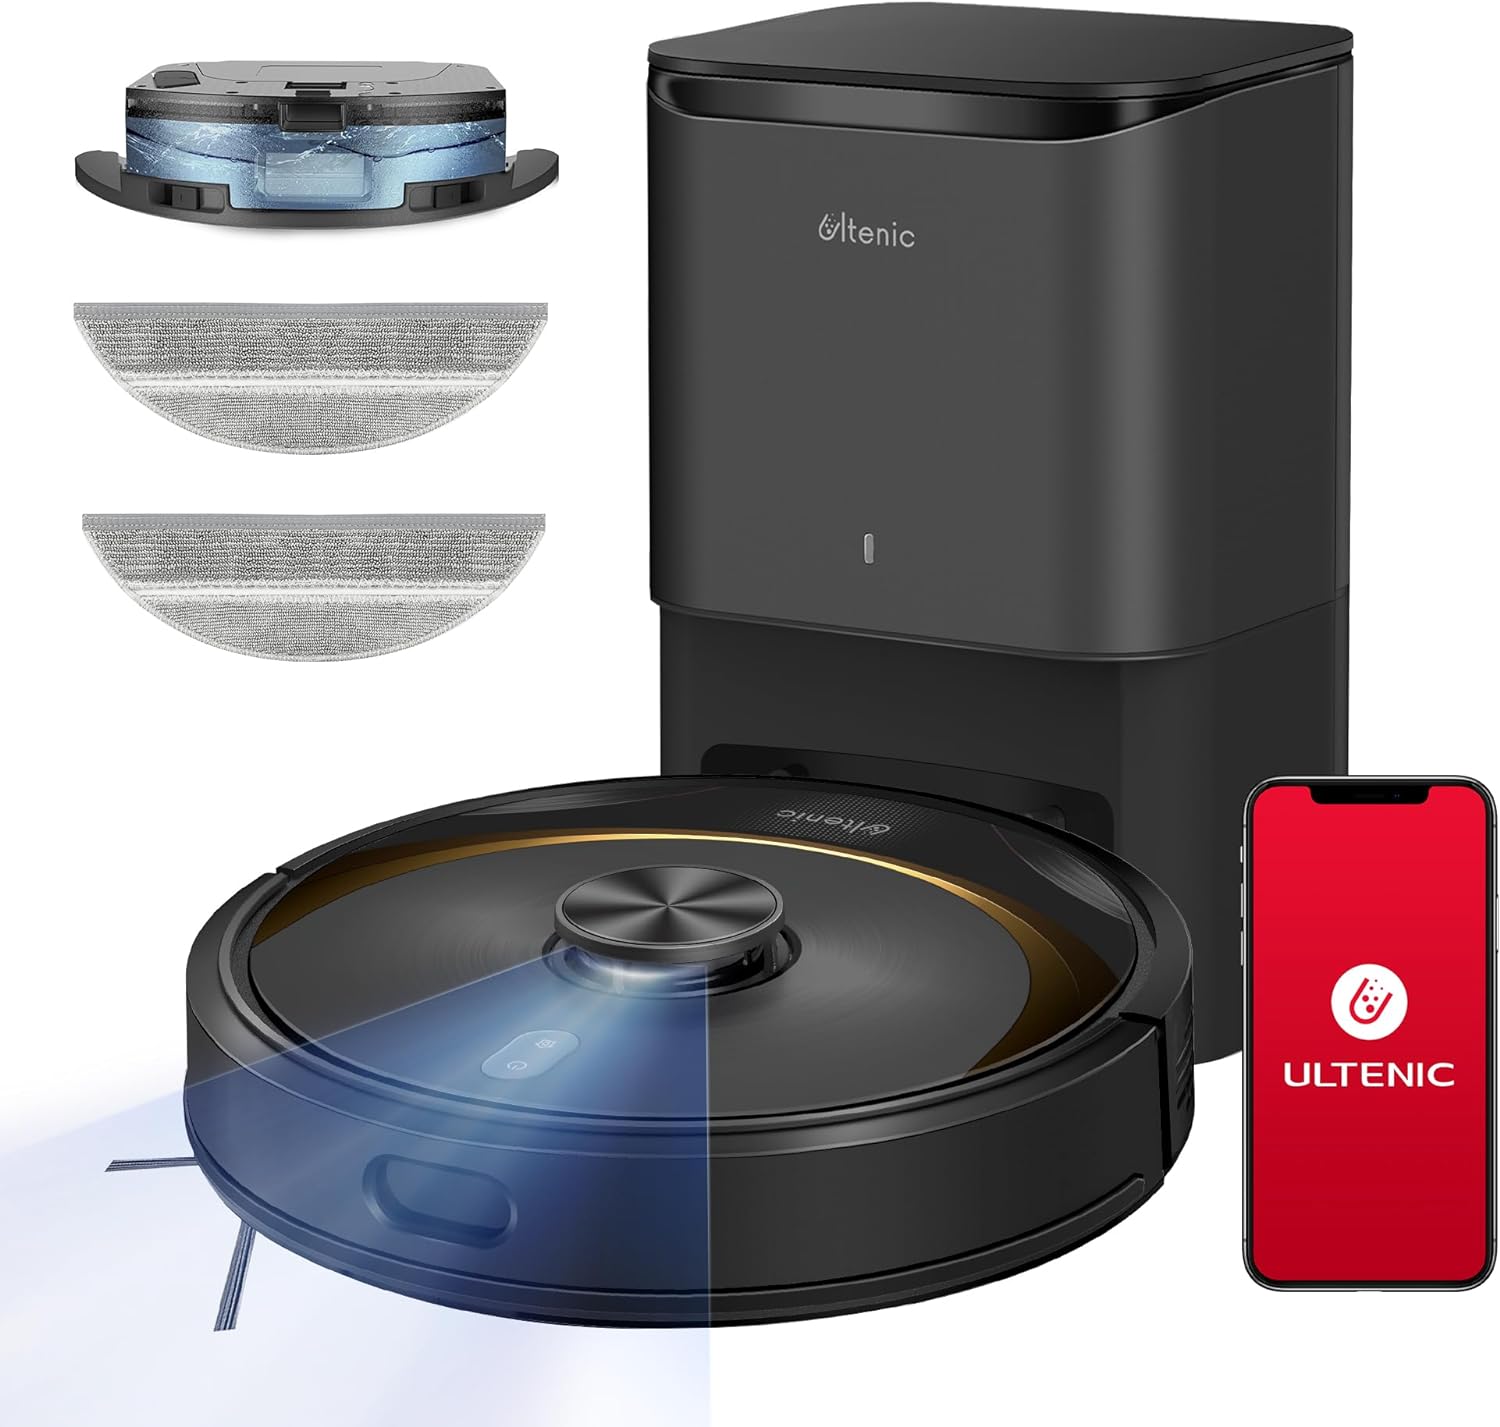 Ultenic T10 Elite Review: Experience Powerful and Hands-Free Cleaning with the Robot Vacuum